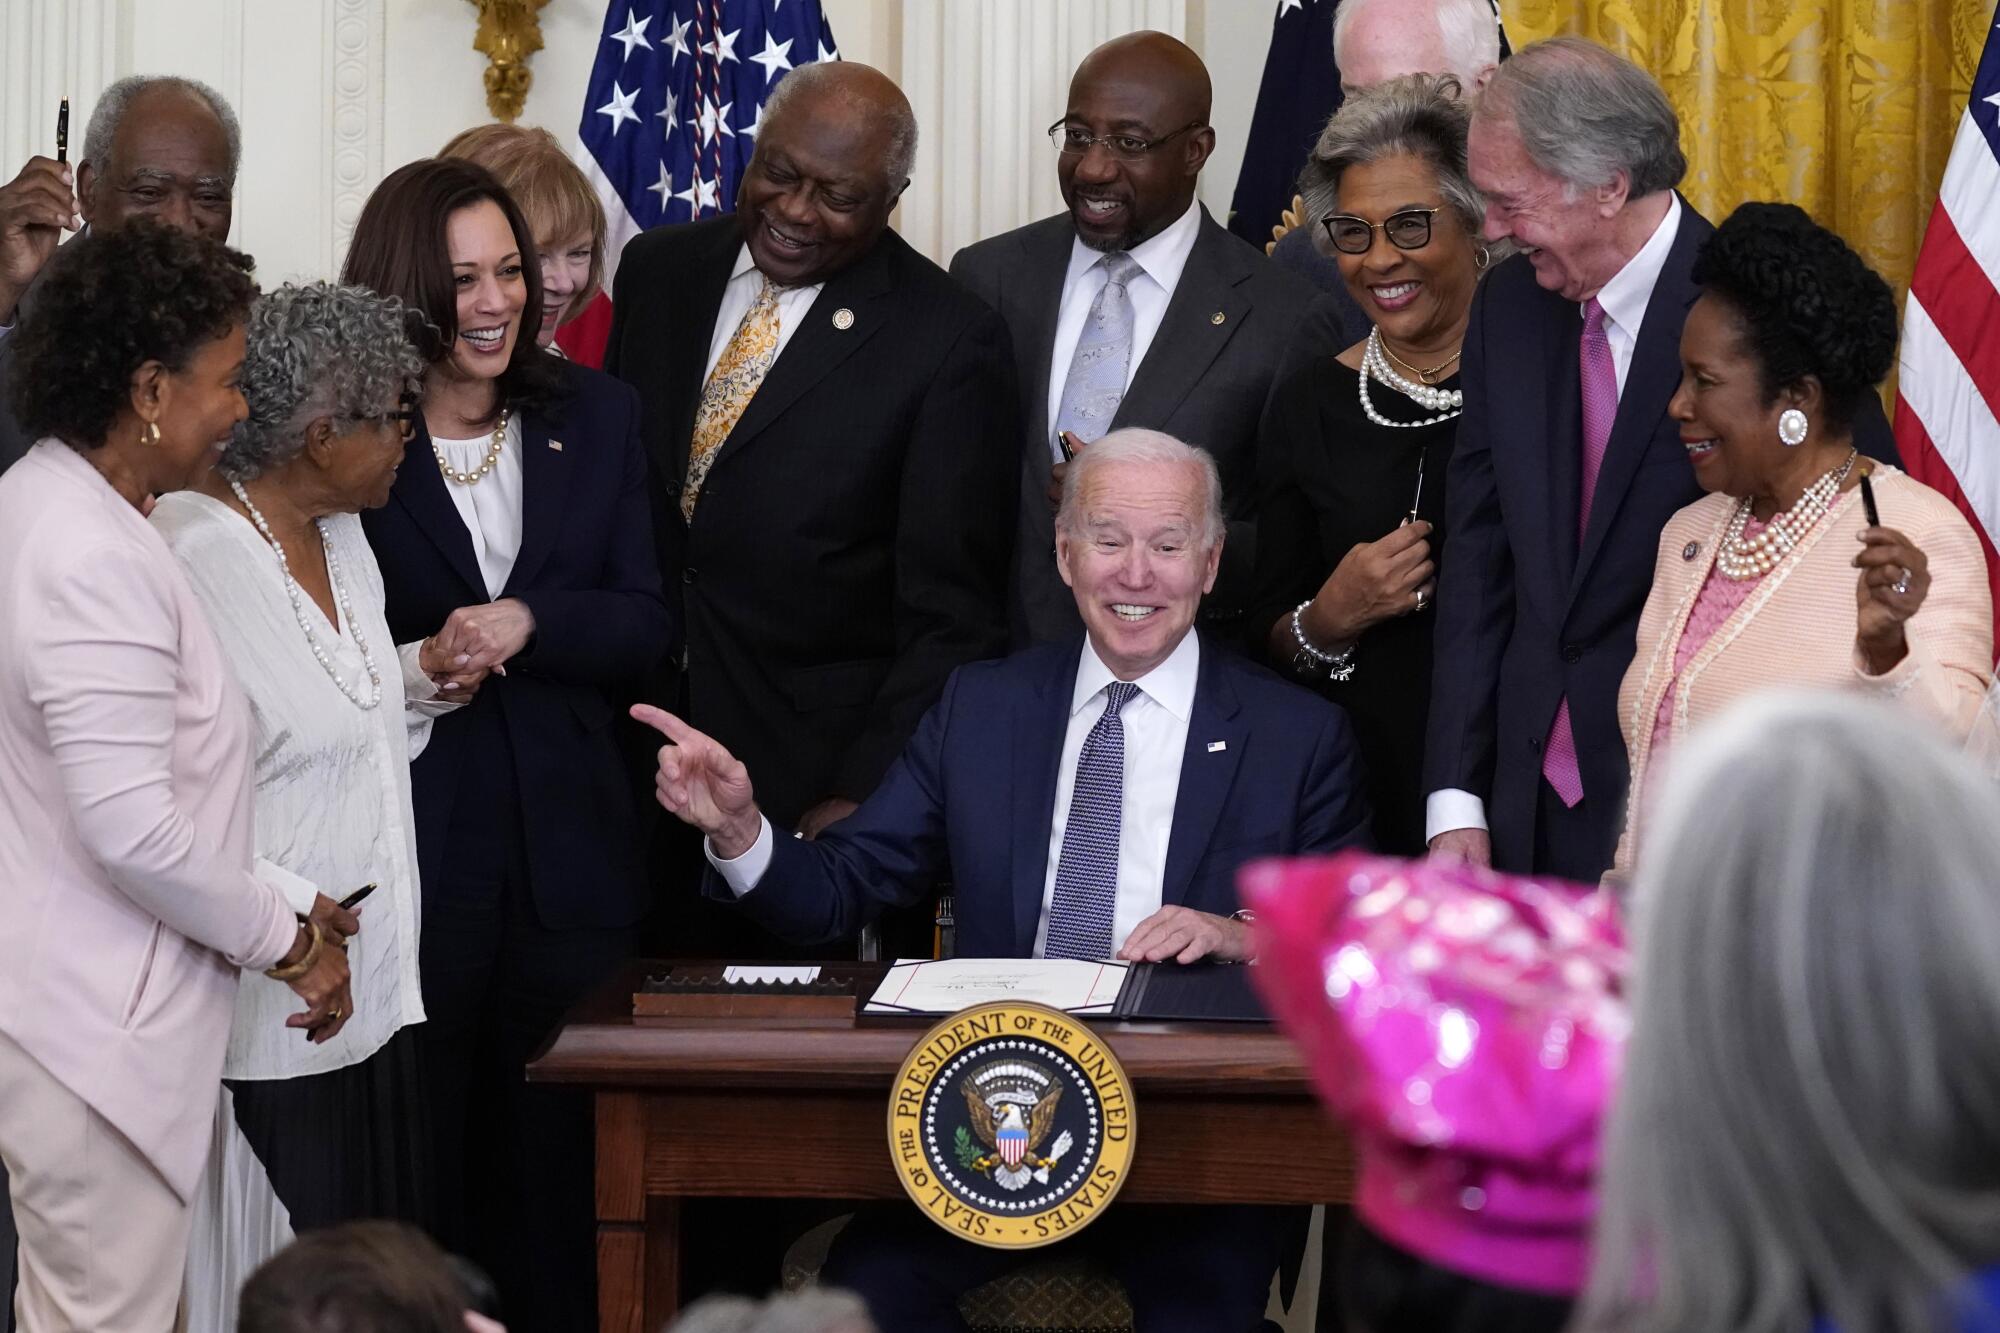 President Biden, surrounded by activist Opal Lee and a number of members of Congress